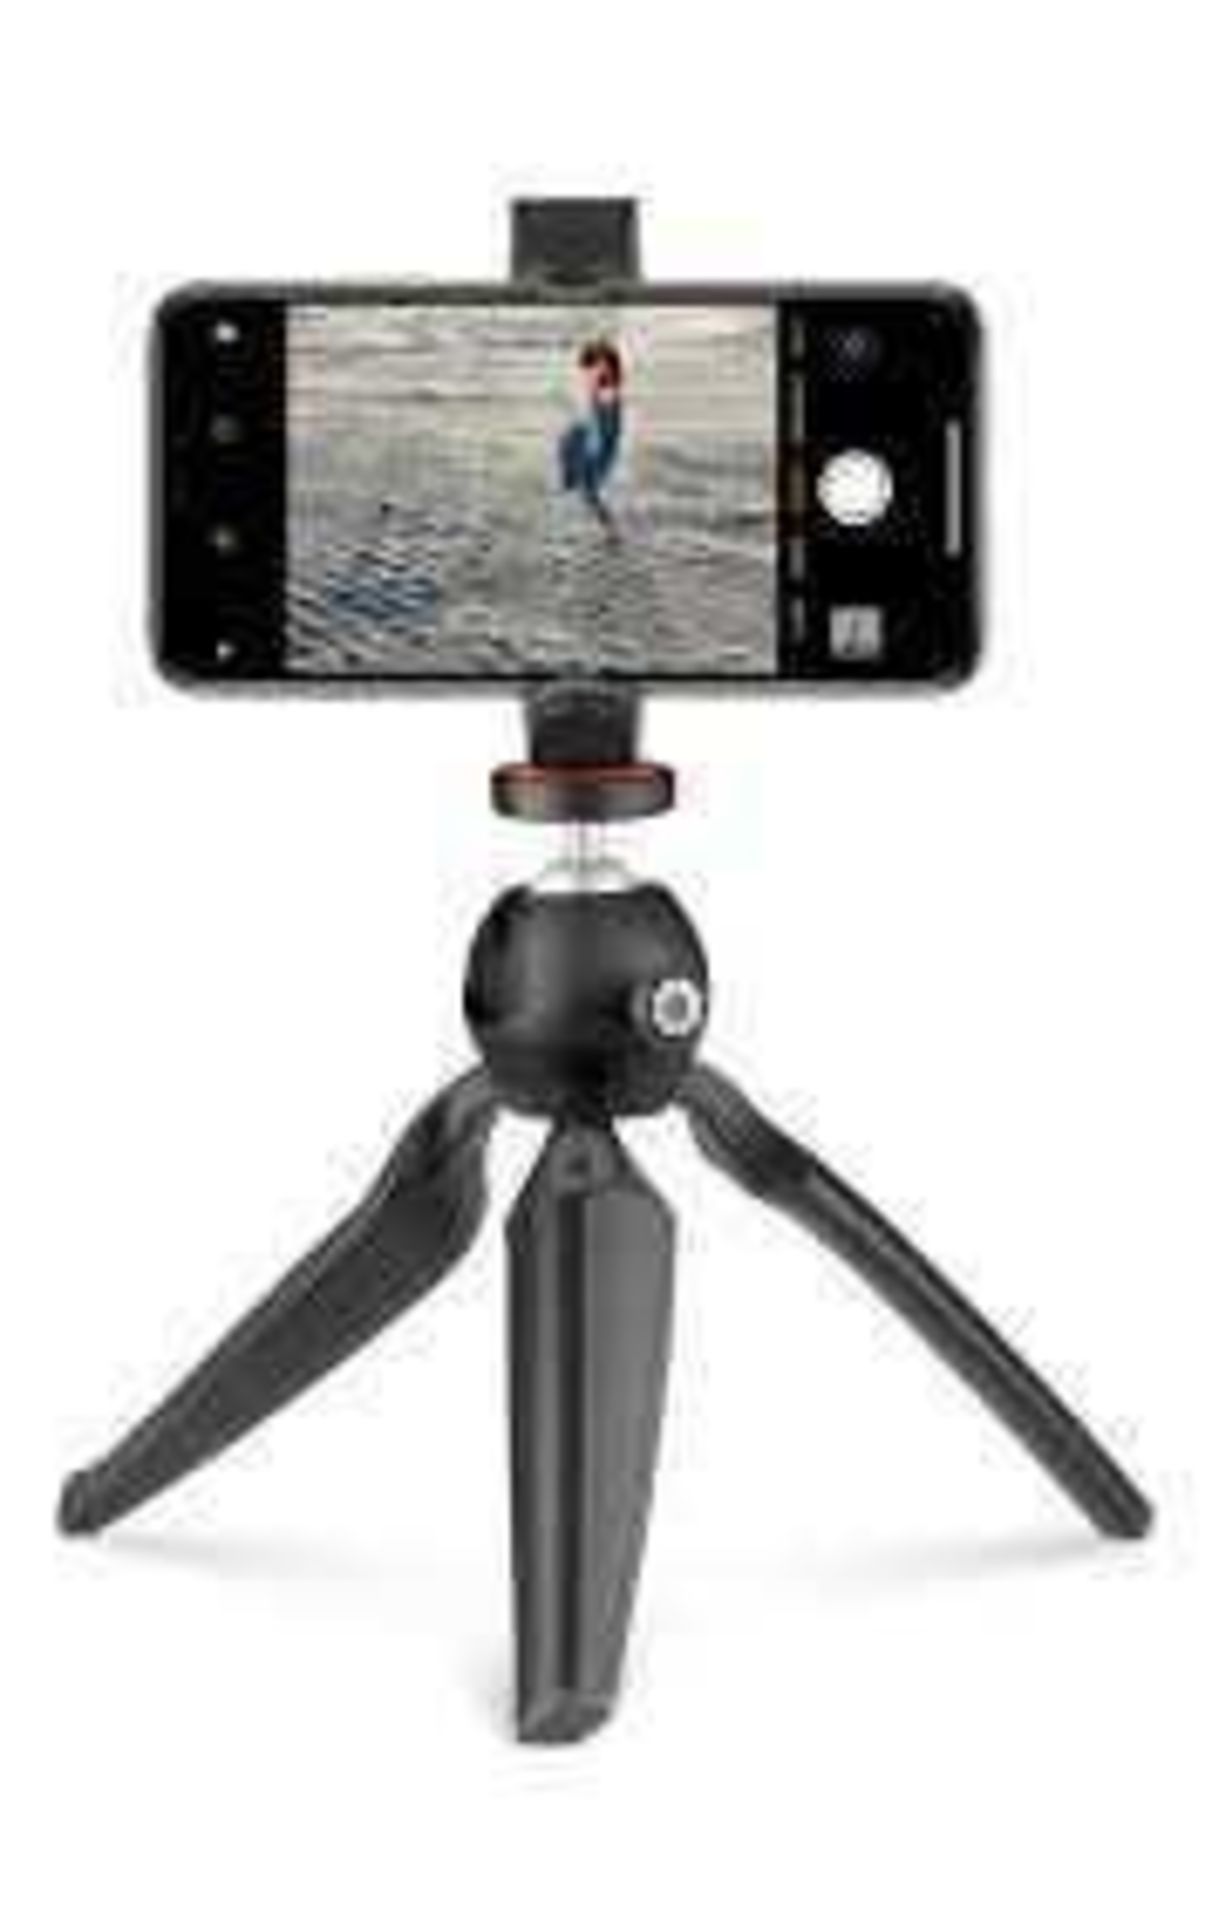 Rrp £35 Each Joby Handipod Mobile Kit Mini Tripod With Universal Smartphone Clamp And Gopro Adaptor - Image 2 of 2